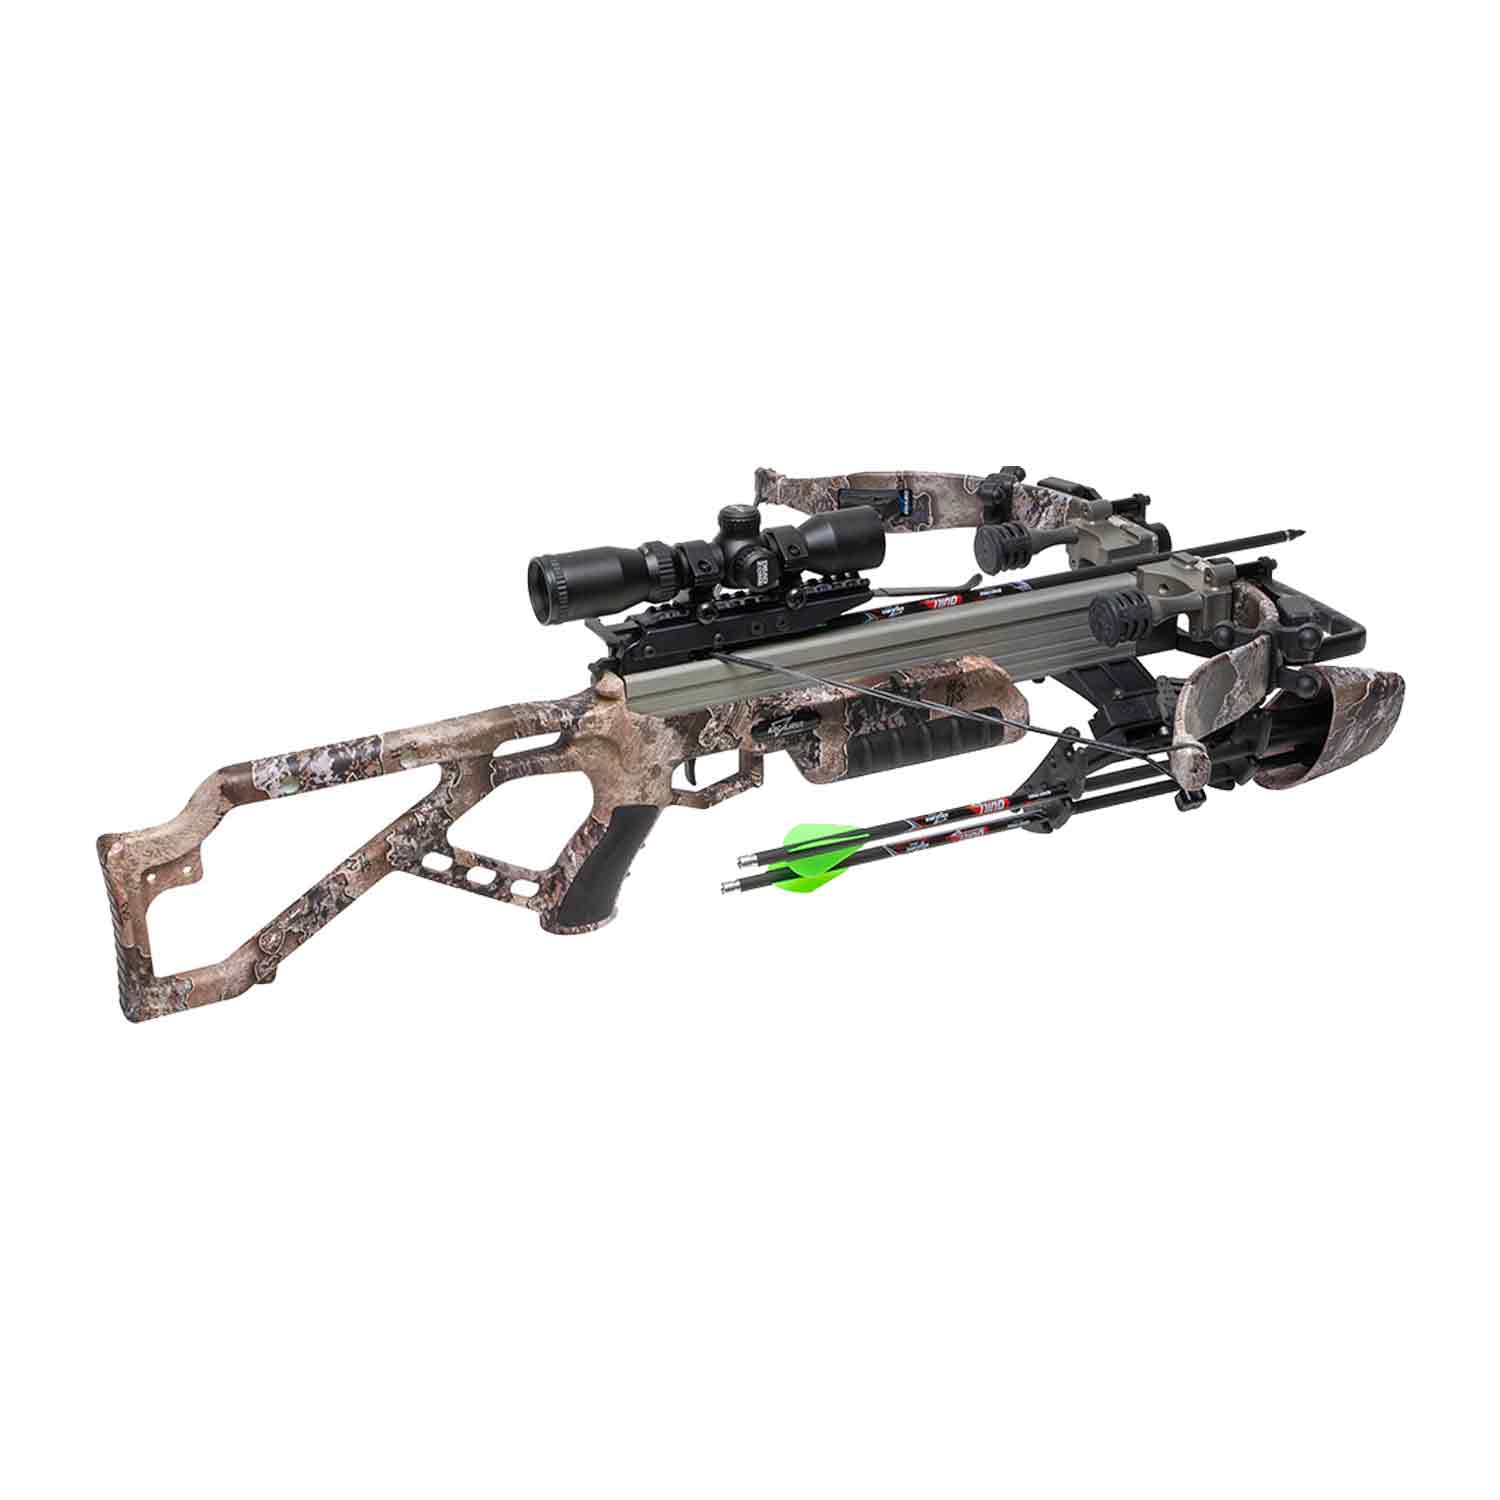 Excalibur Mag 340 Realtree Excape Crossbow Package